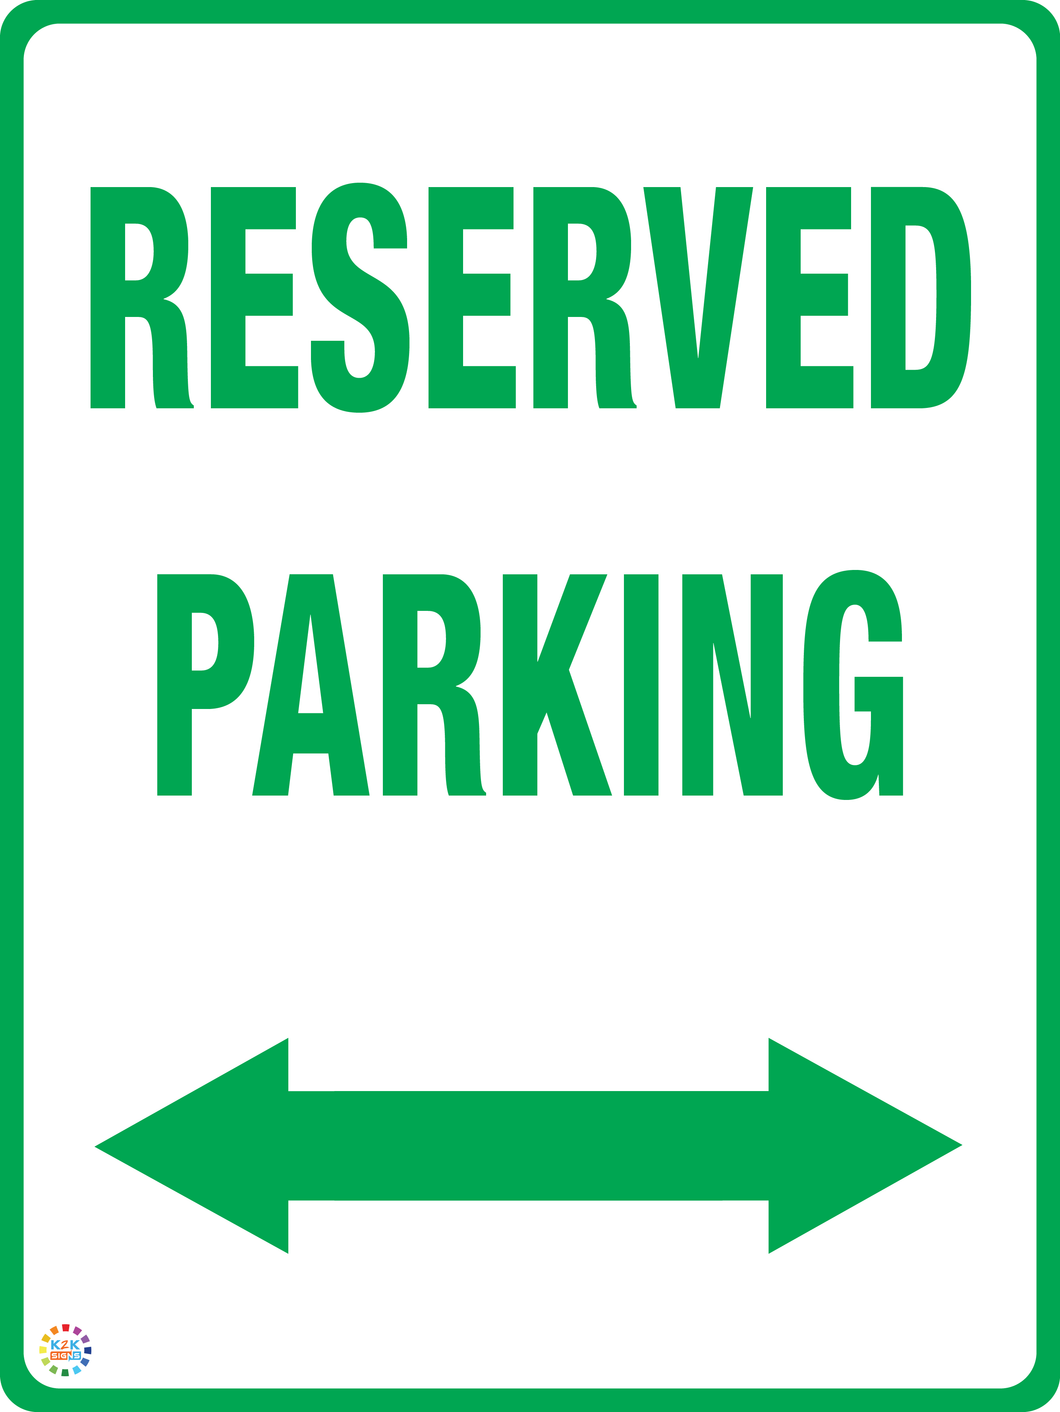 Reserved Parking (Two Way Arrow) Sign